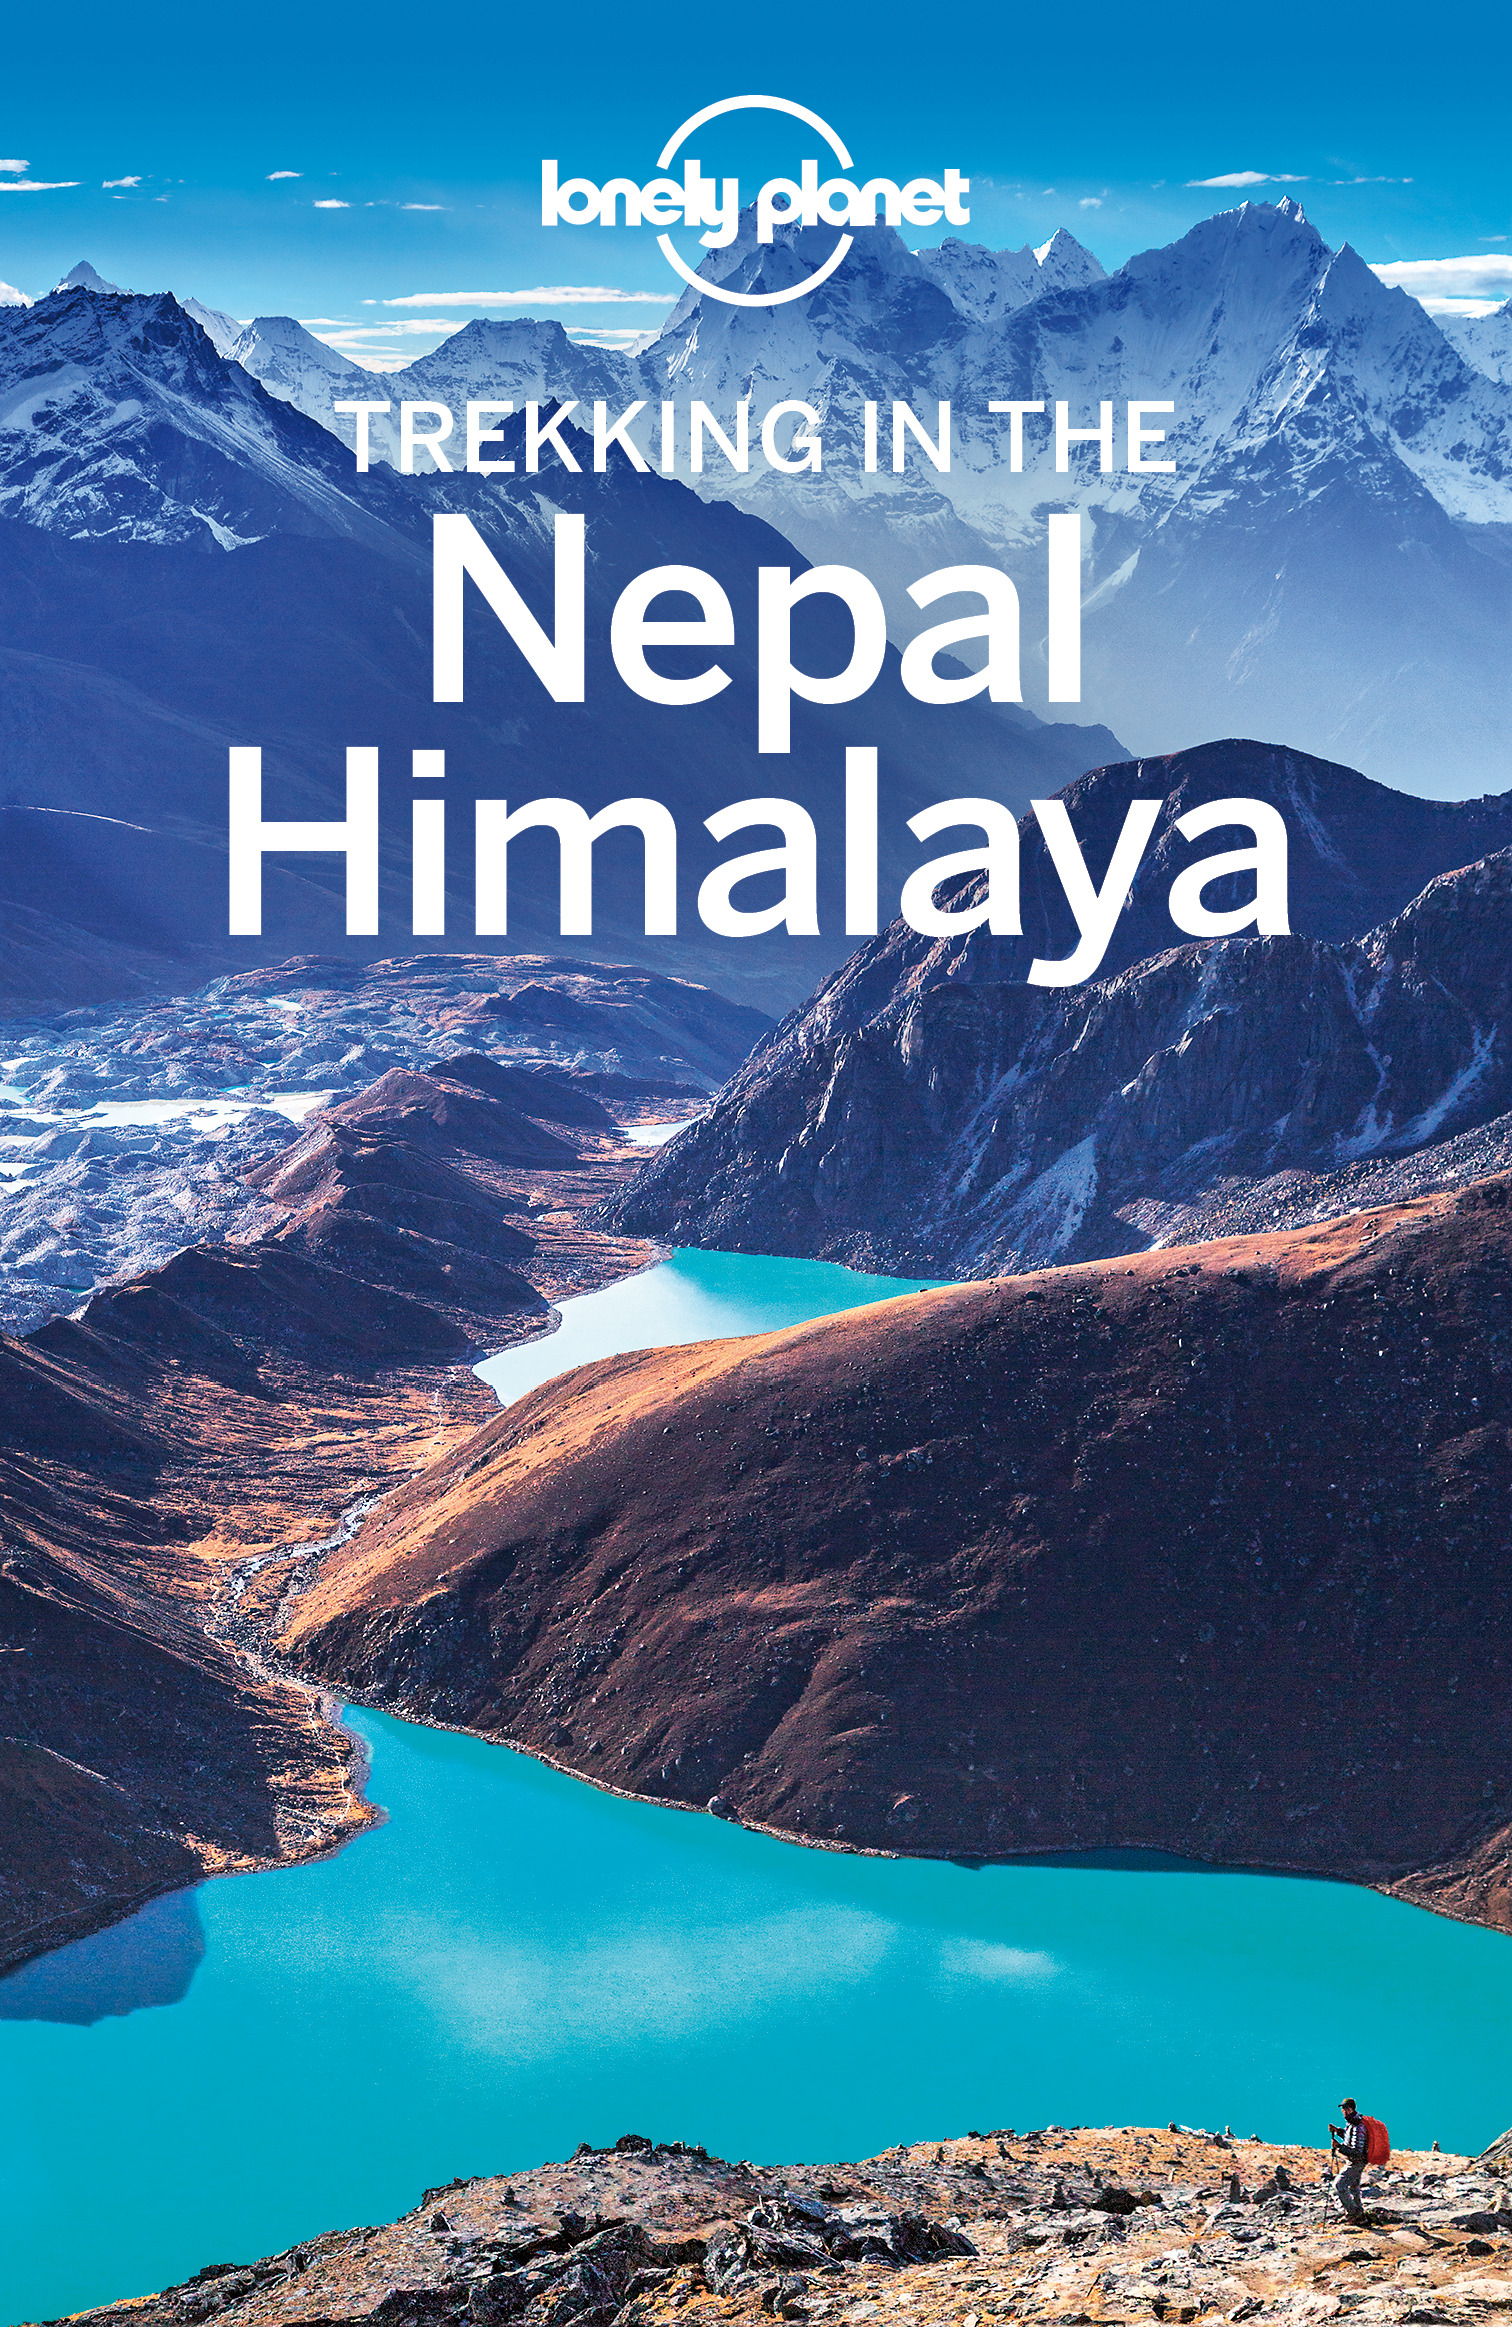 Brown, Lindsay - Lonely Planet Trekking in the Nepal Himalaya, e-bok